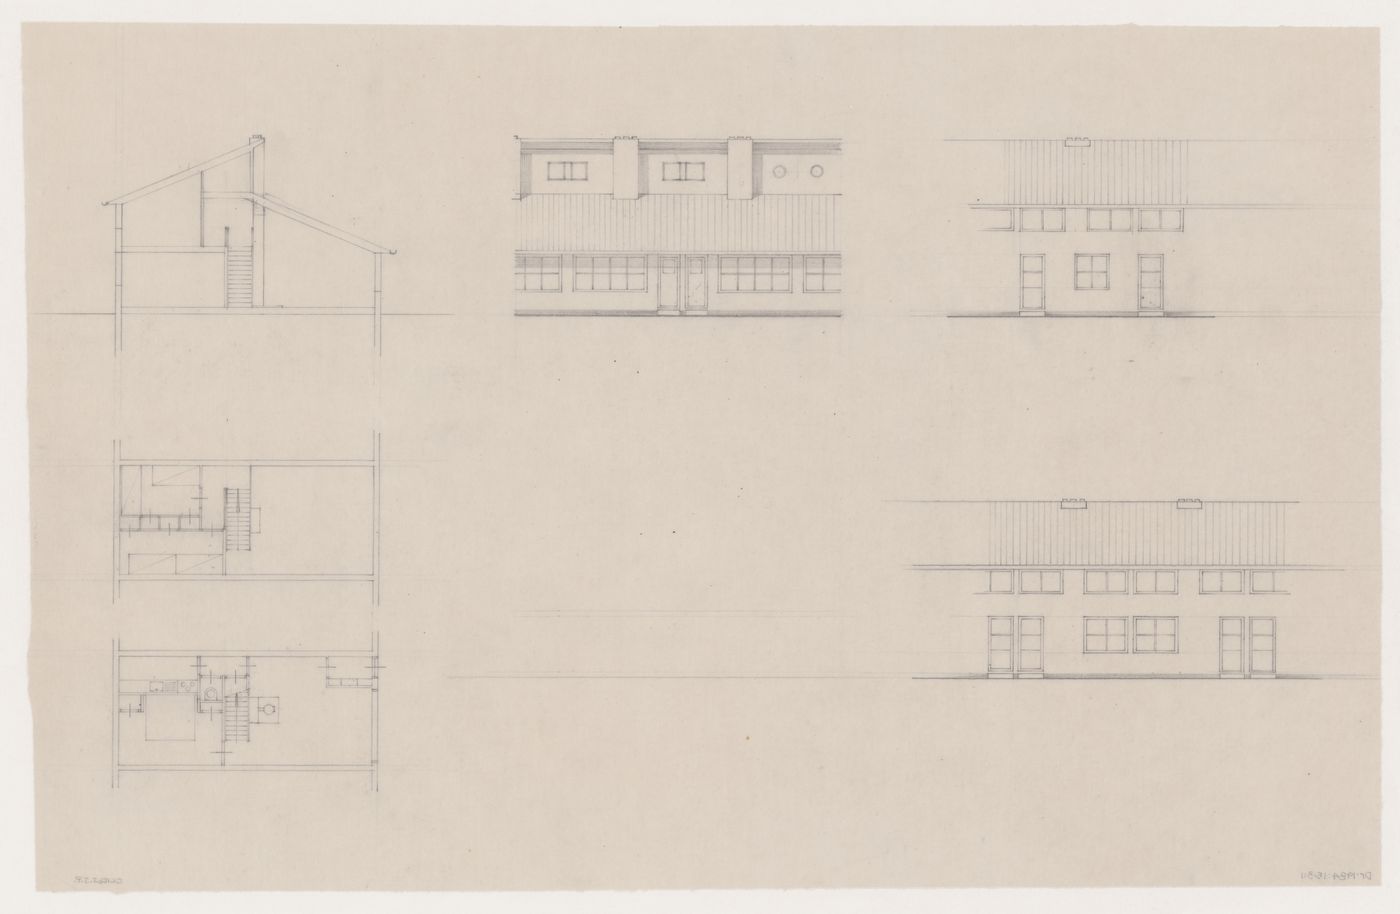 Plans, elevations, and section for a house/studio, Hillegersberg, Netherlands